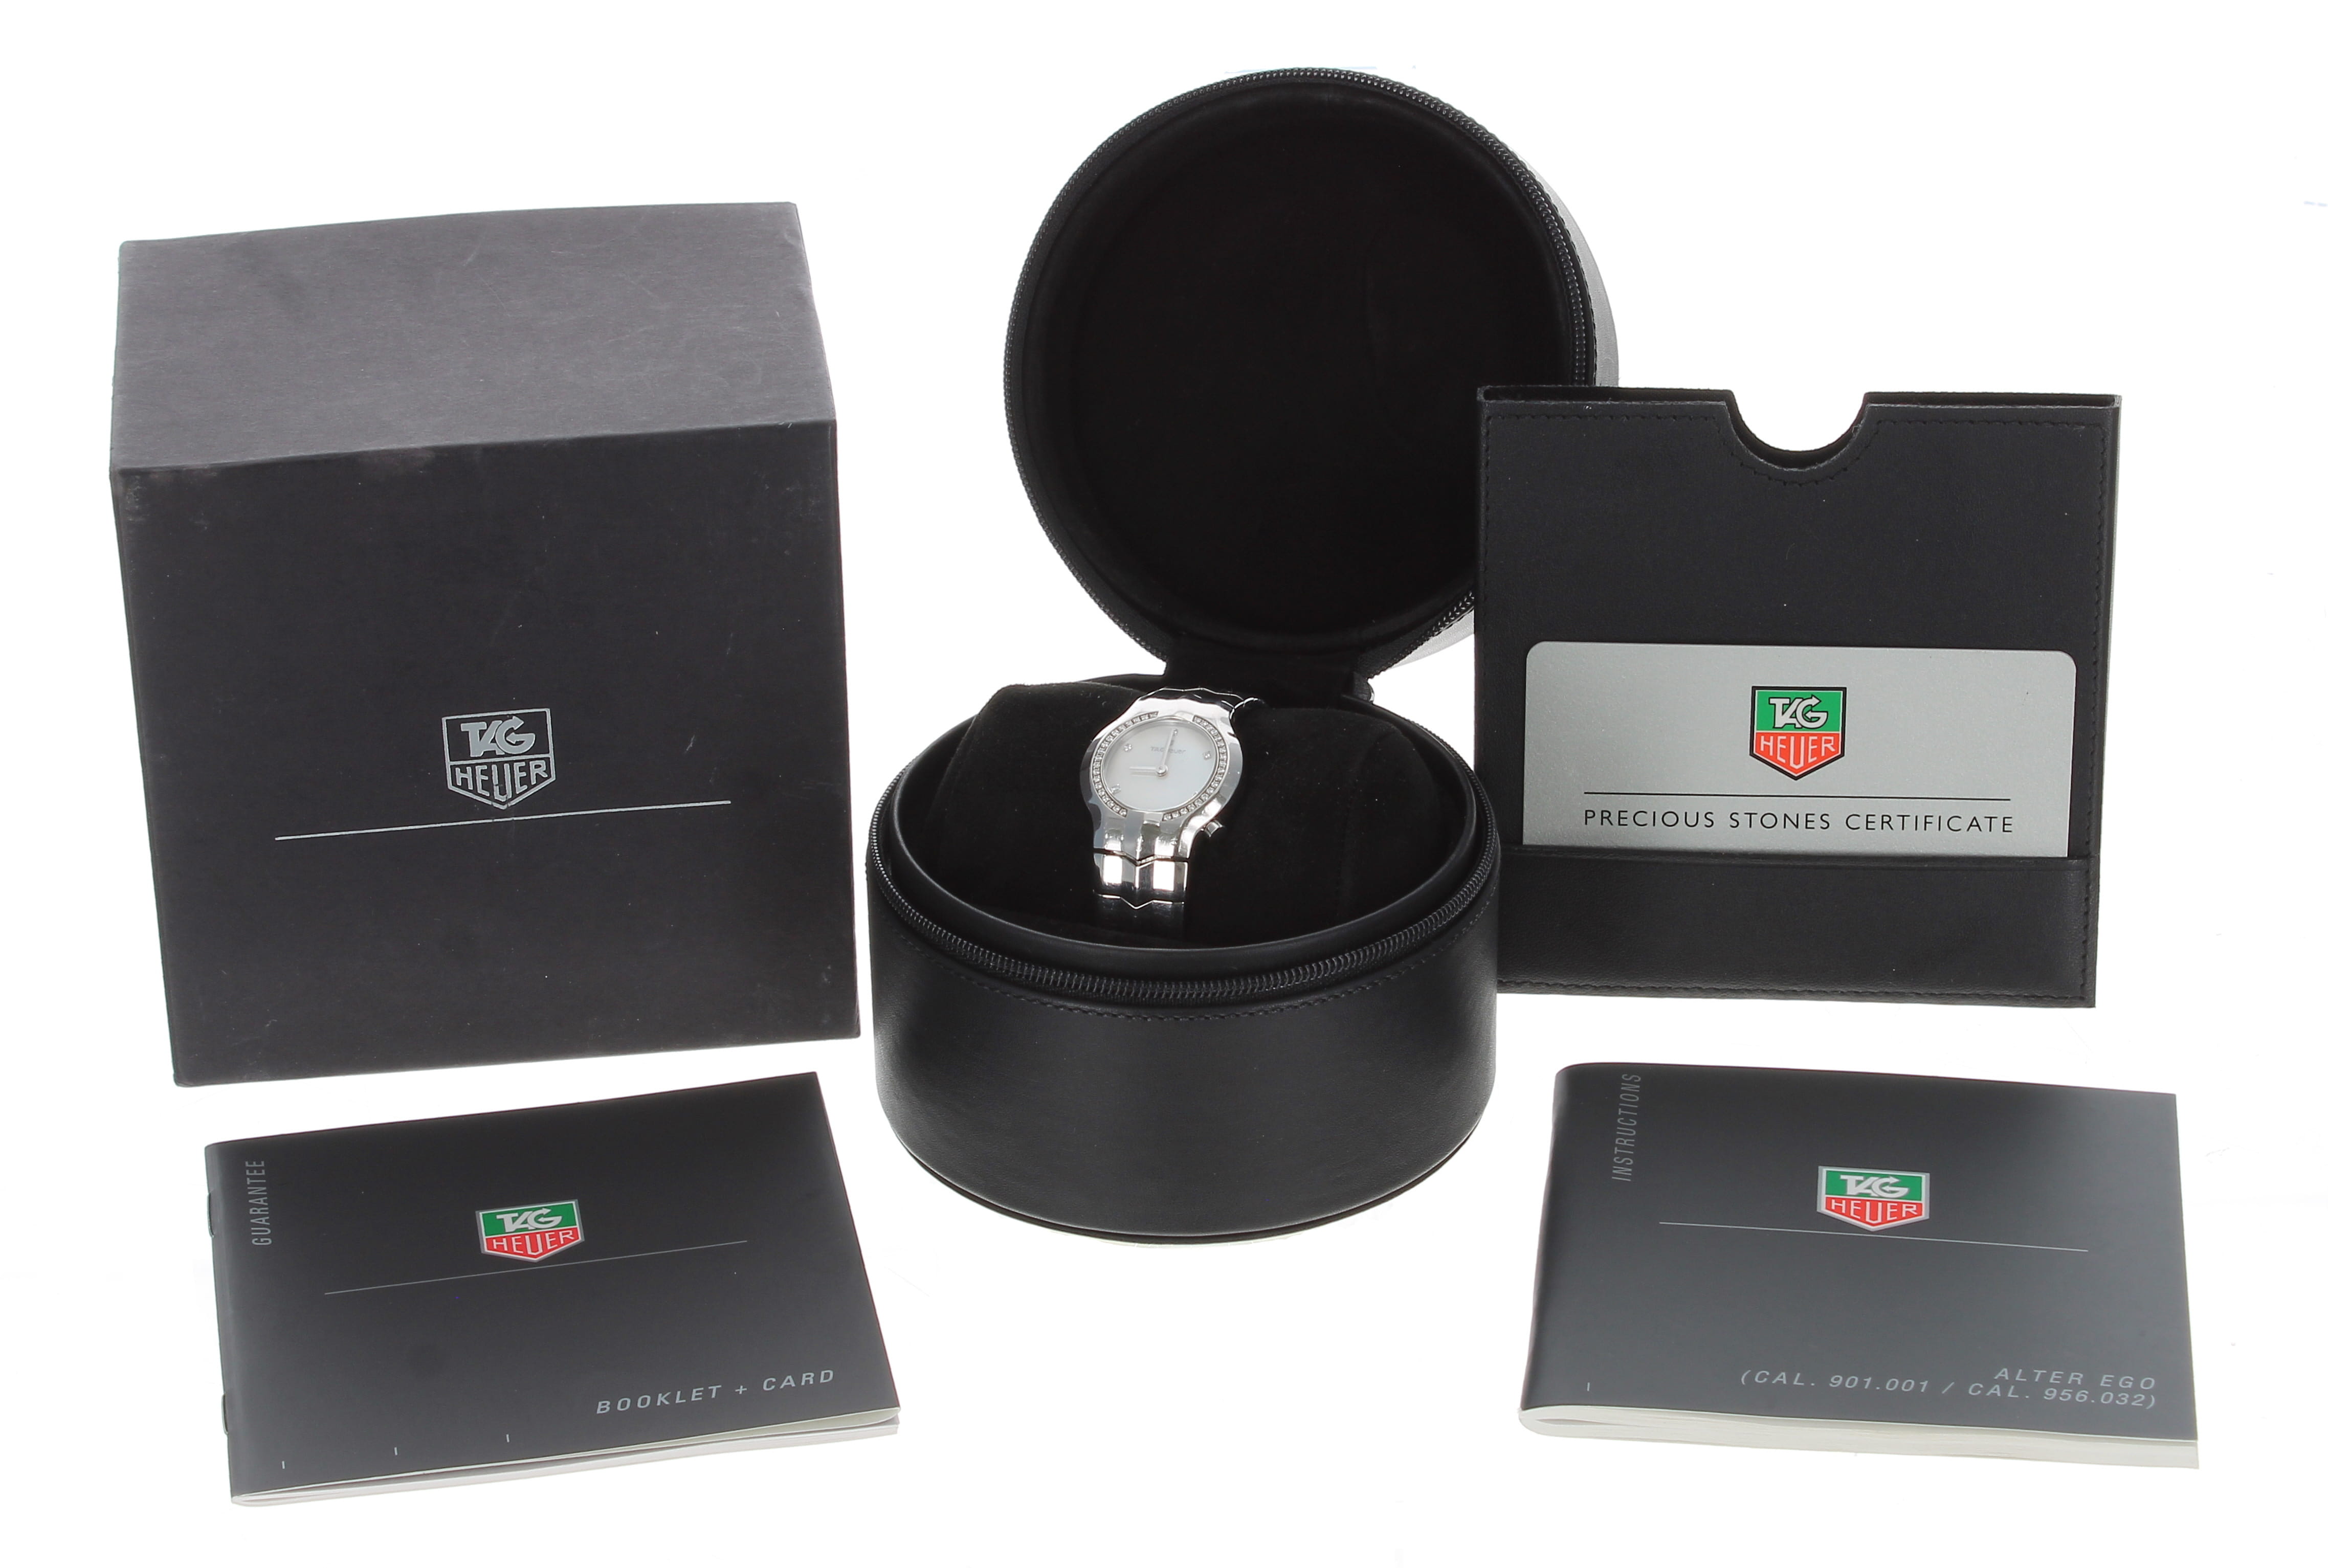 Tag Heuer Alter Ego stainless steel lady's wristwatch, reference no. WAA1416, serial no. YF8xxx, - Image 3 of 3